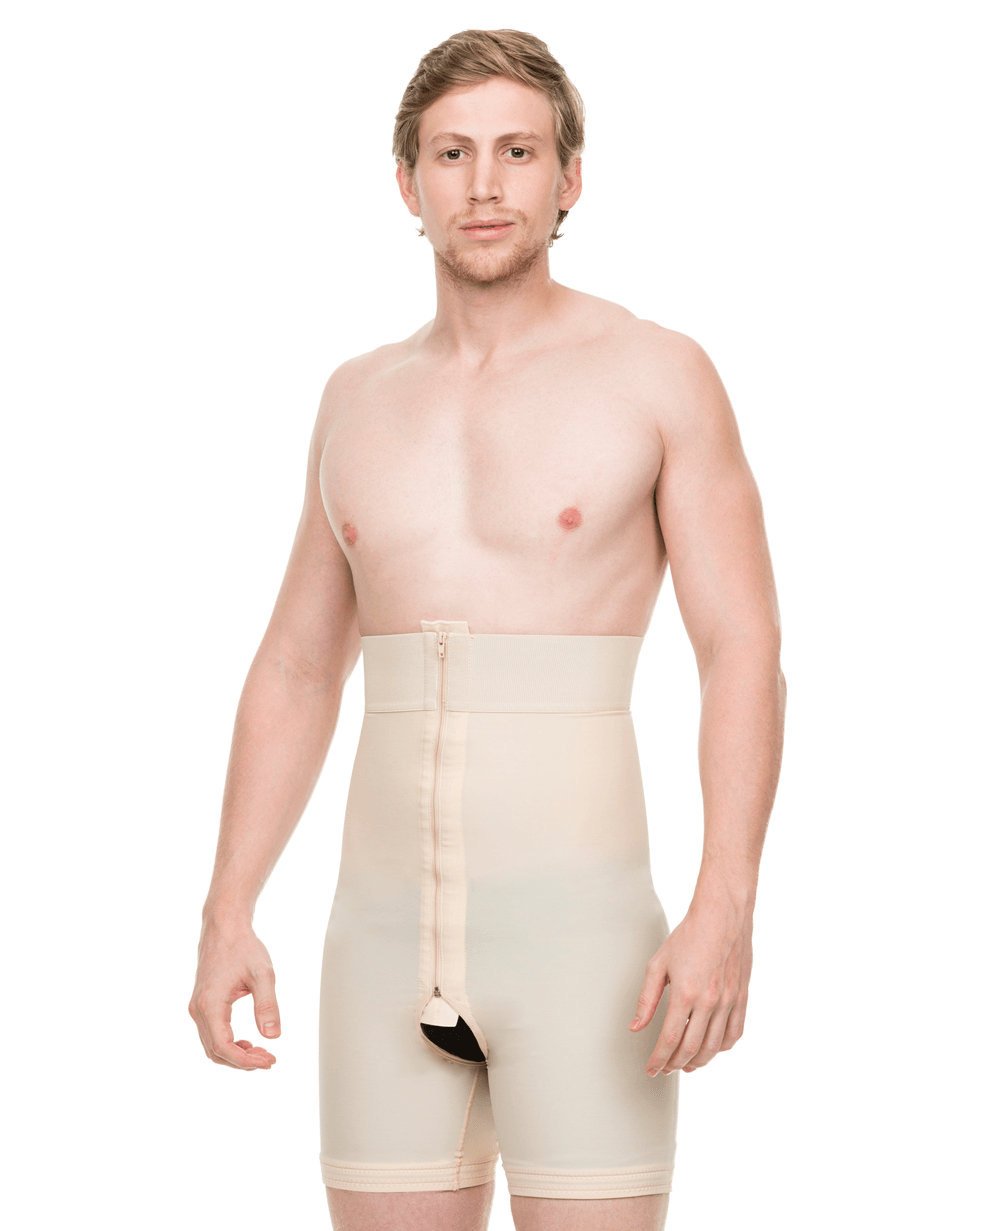 Full Body Suit Post Surgery Compression Faja / Girdle - Promoting